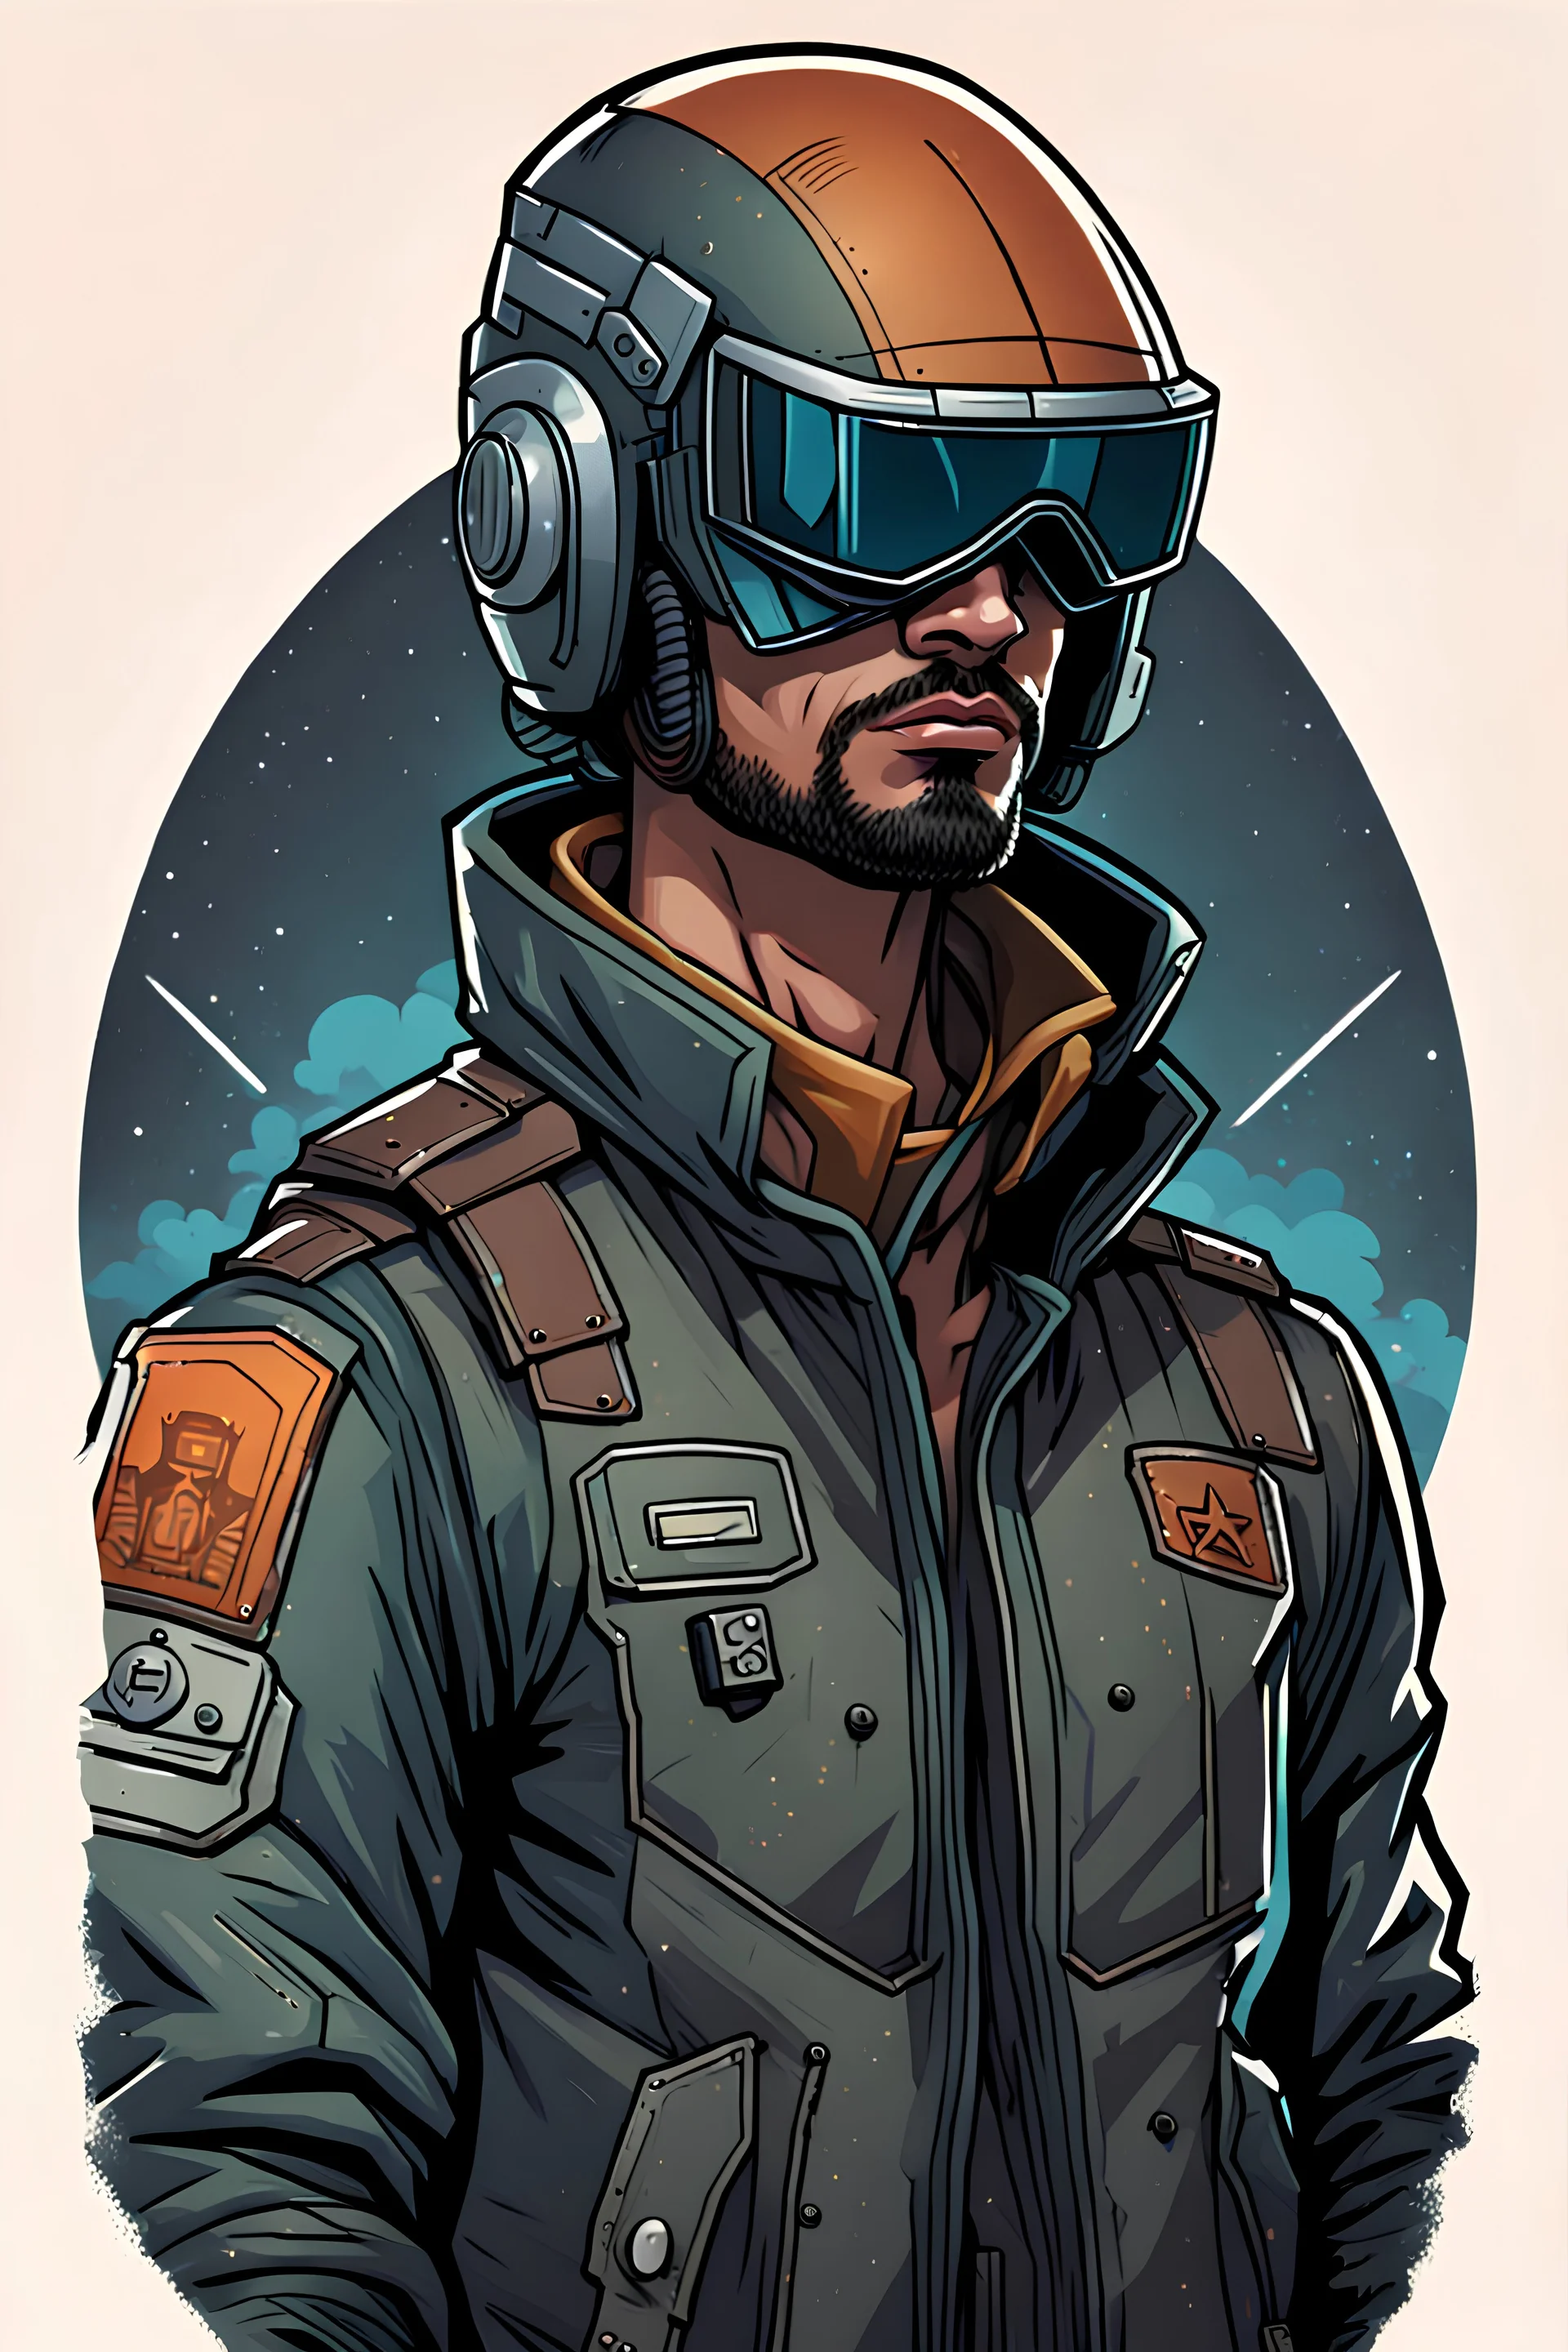 High Quality Science Fiction Character Portrait of an helmeted bounty hunter in a Bomber Jacket. Illustrated in the Style of the Archer Tv Series.